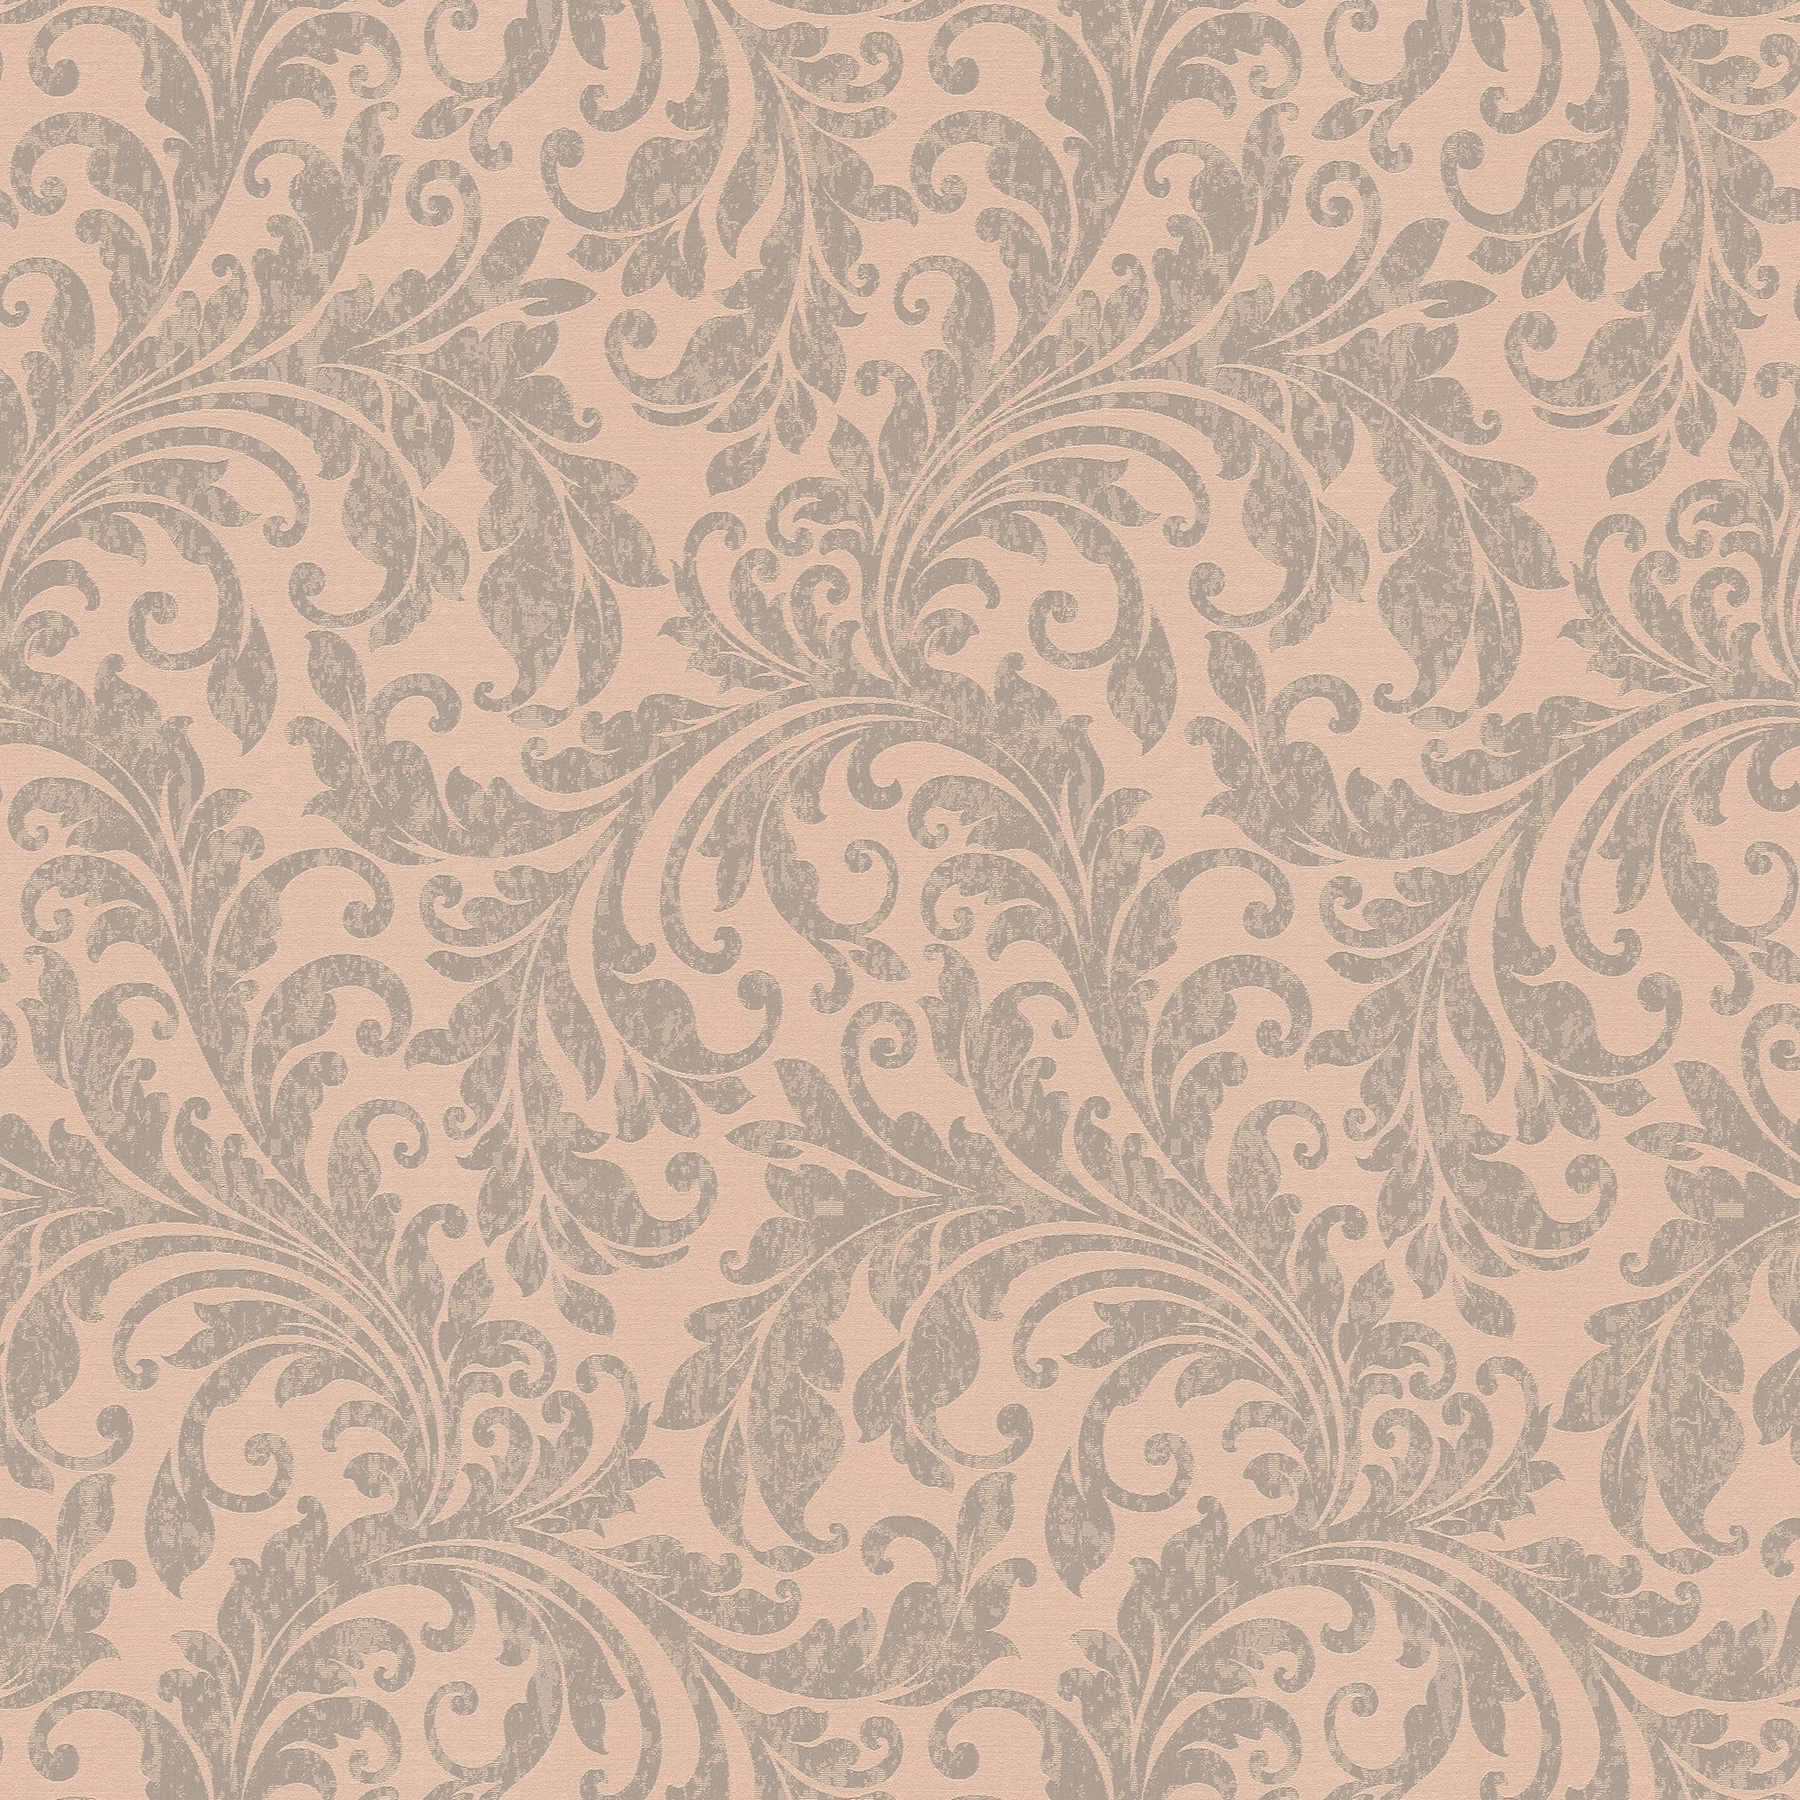 Non-woven wallpaper vines in used style & vintage look - brown
